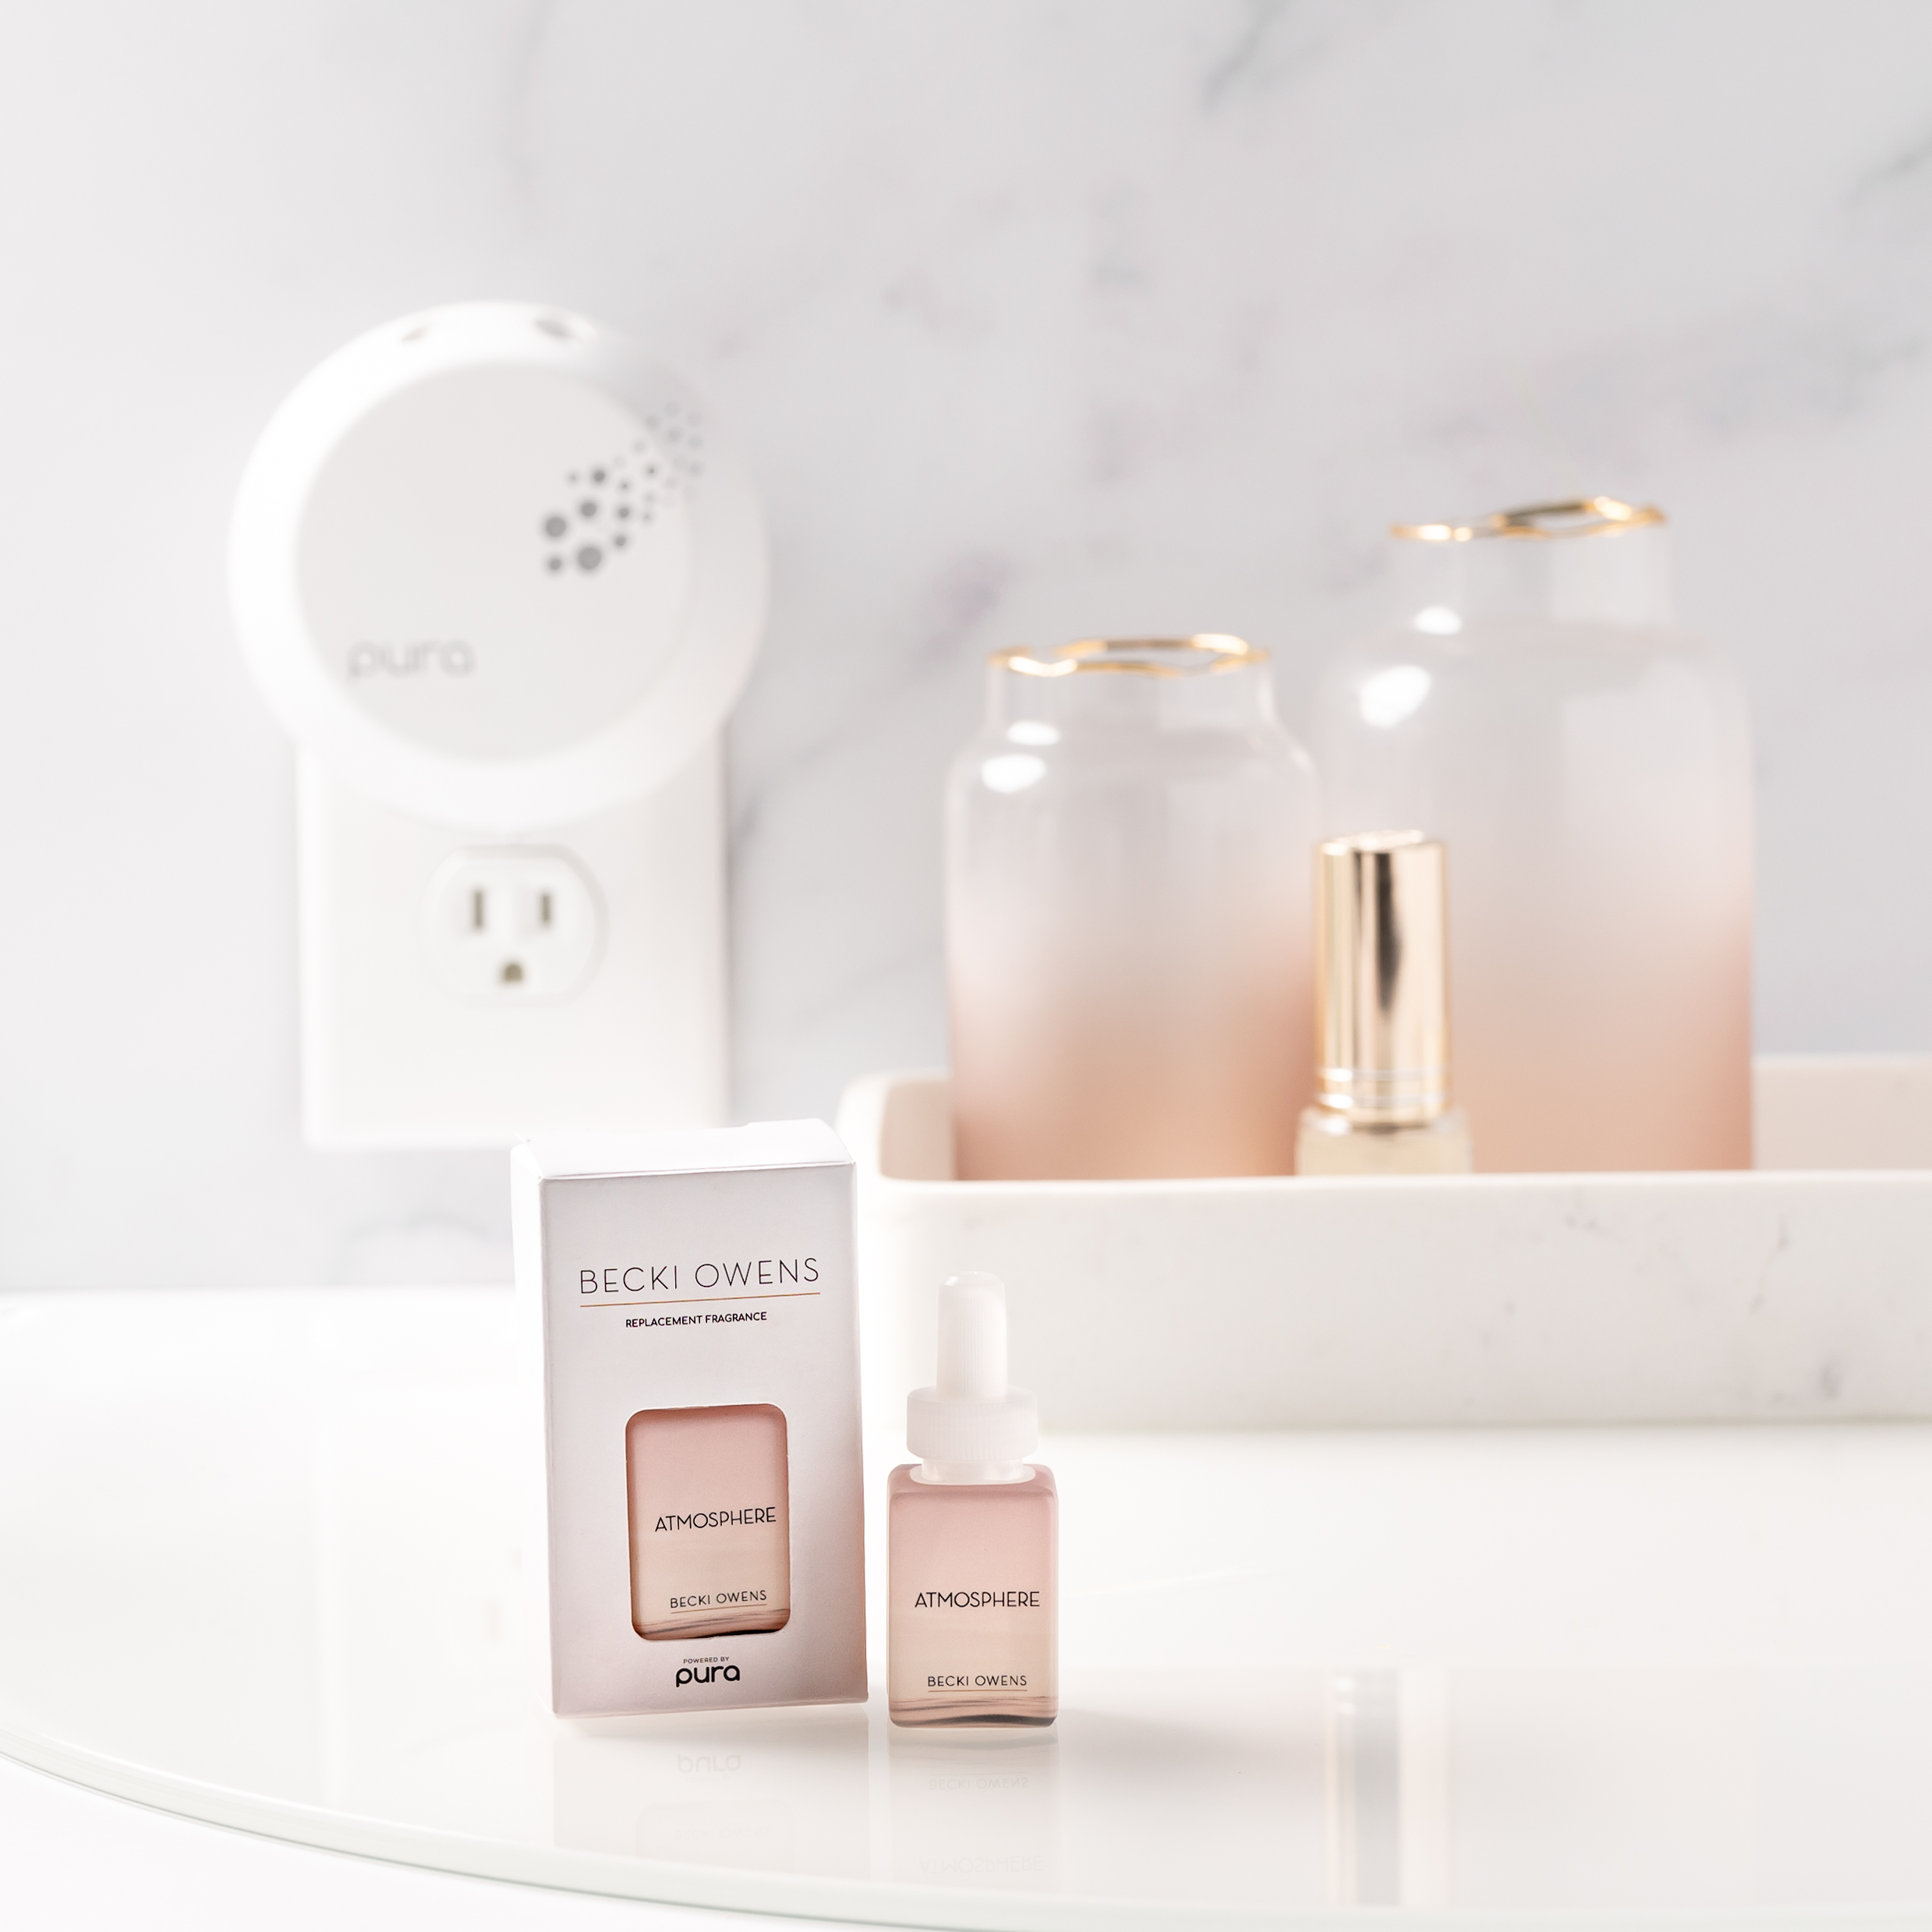 Two All New Becki Owens Signature Home Scents from Pura